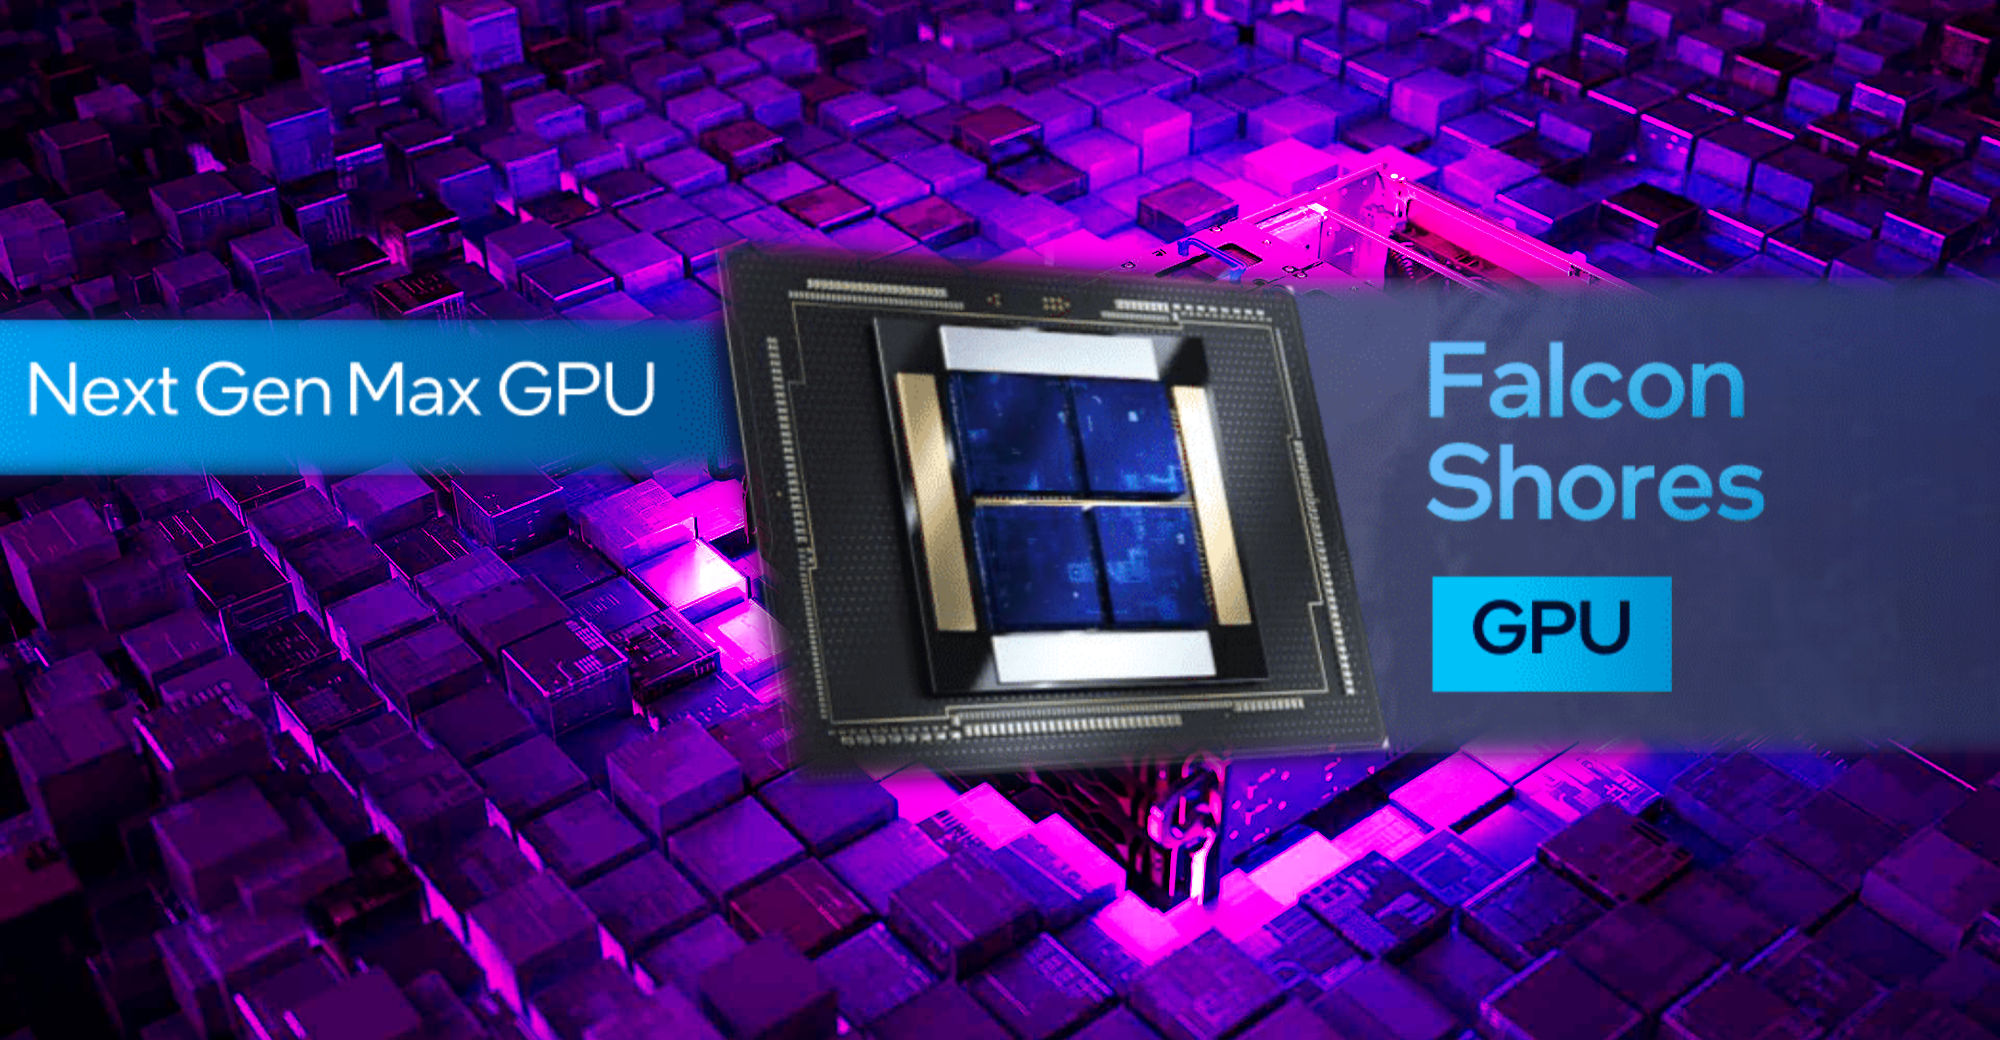 Intel Falcon Shores to launch in 2025 as a GPUonly solution